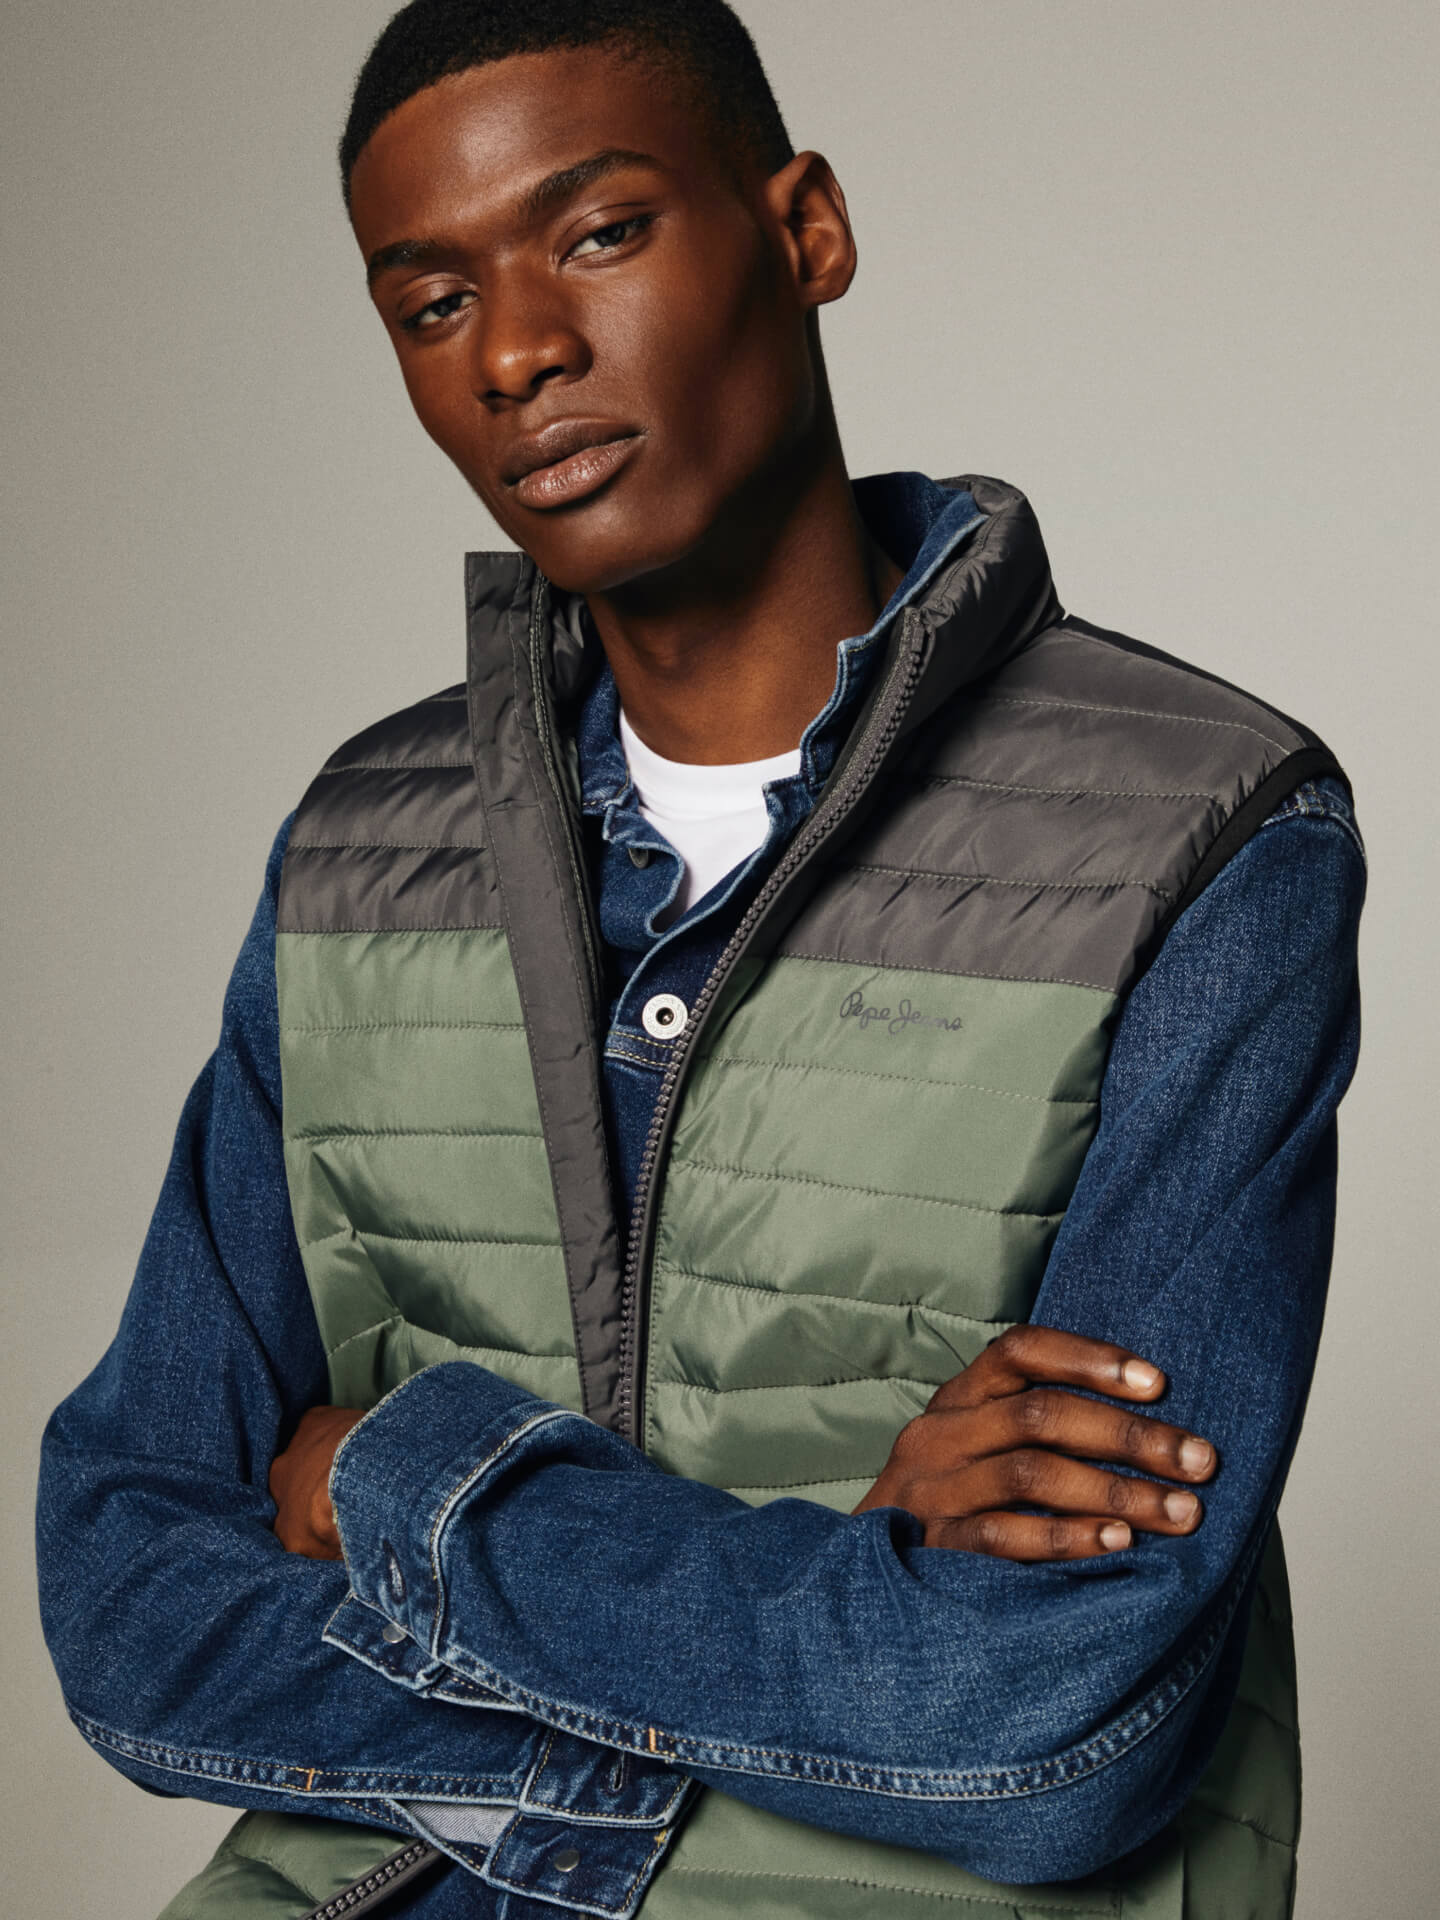 Pepe Jeans London - Official Website